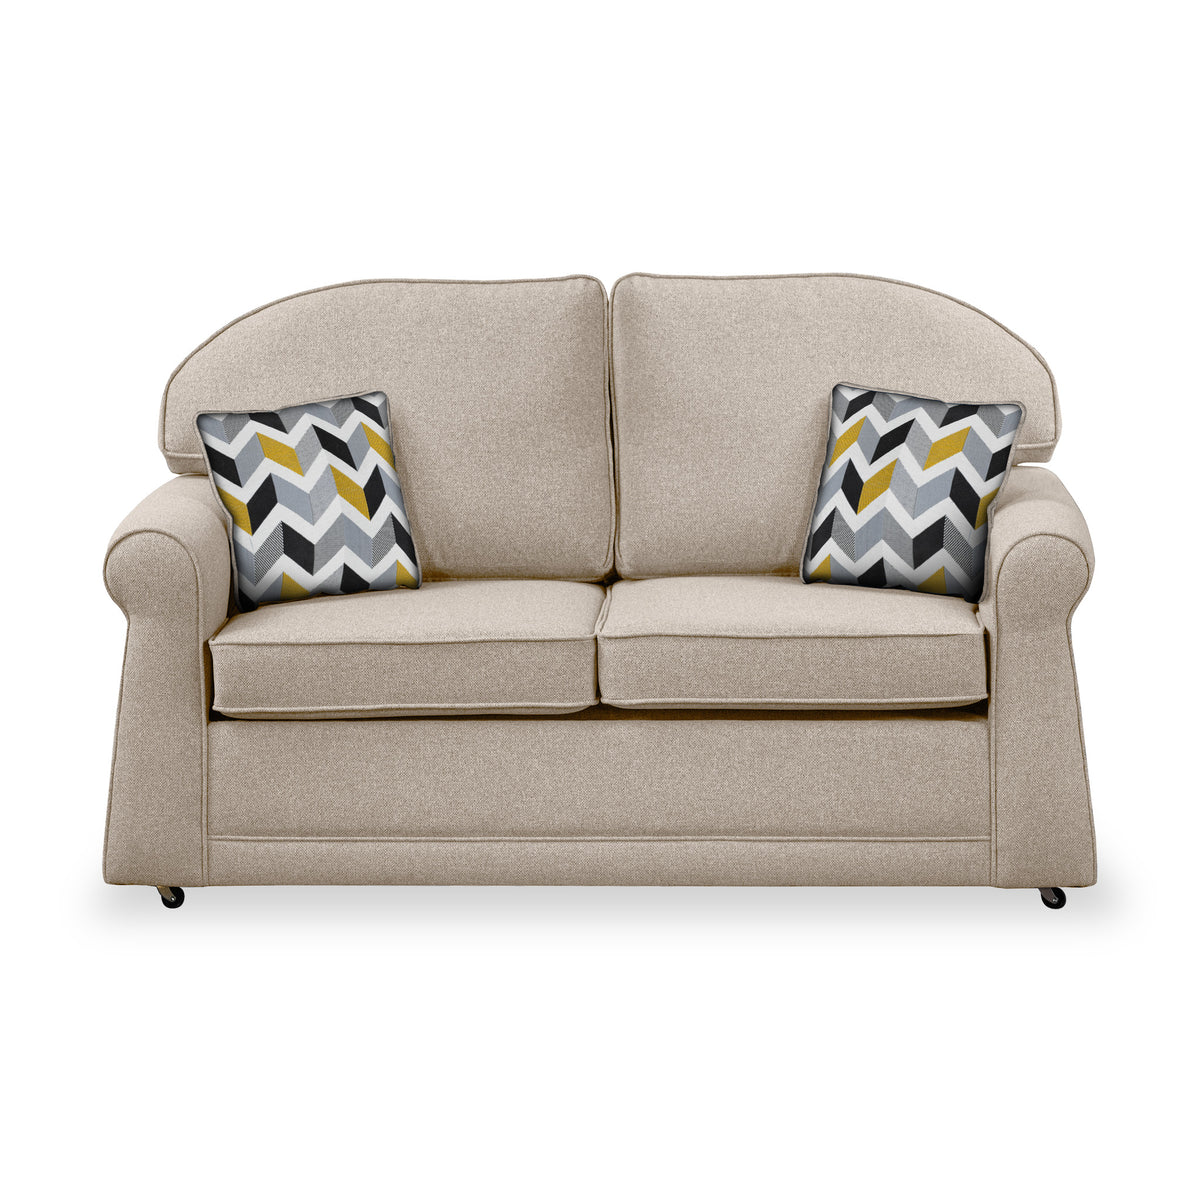 Giselle Fawn Soft Weave 2 Seater Sofabed with Mustard Scatter Cushions from Roseland Furniture